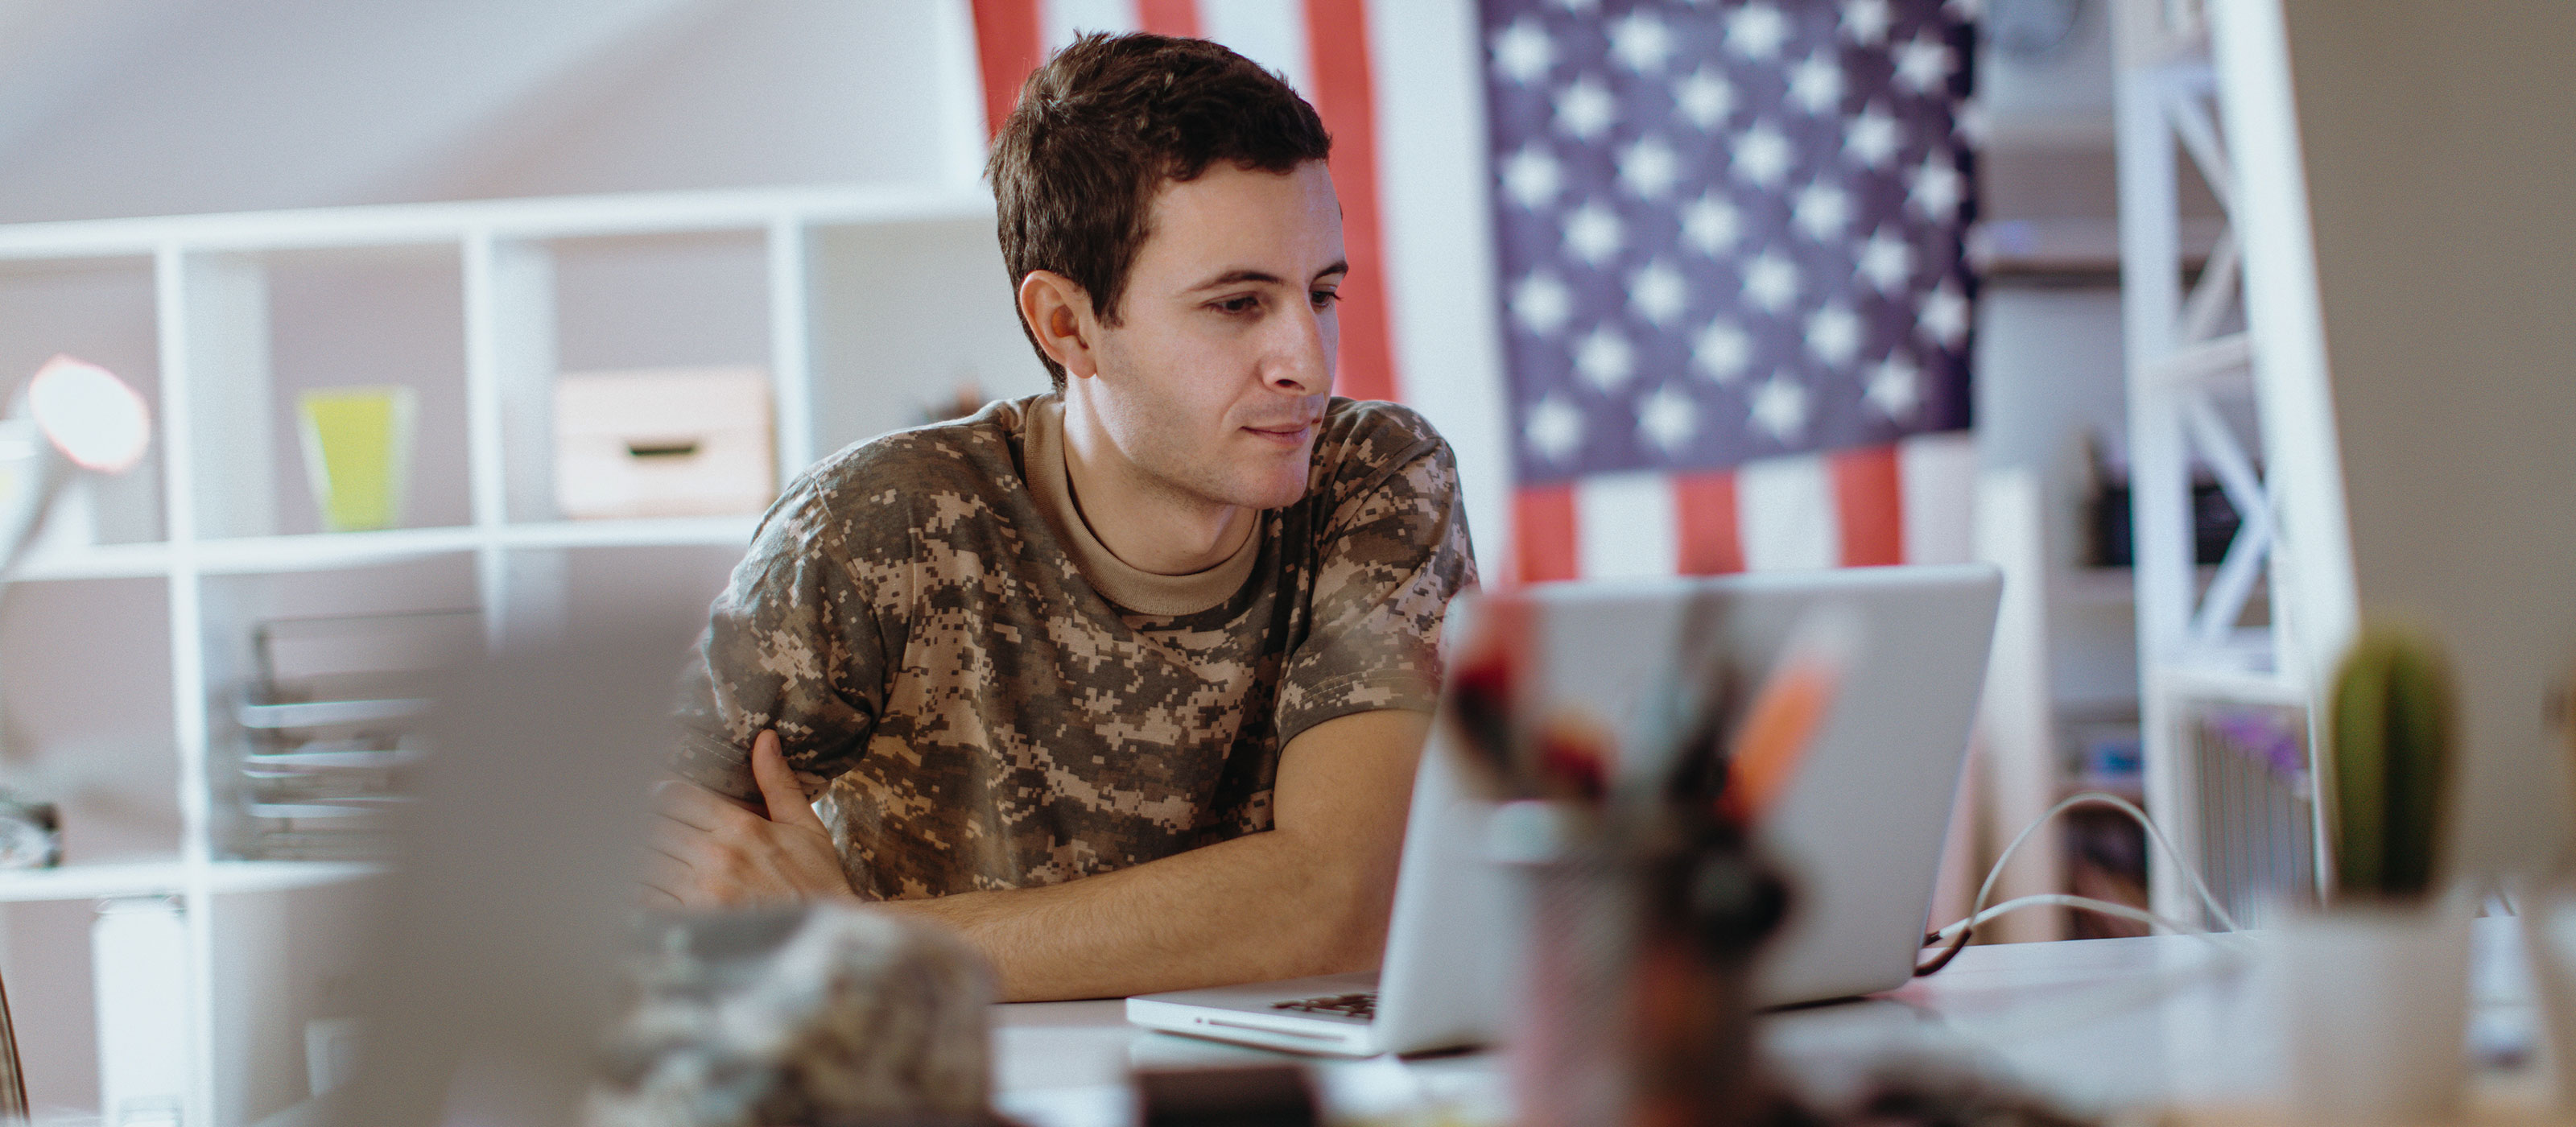 Man in camouflage sitting at a desk with a laptop